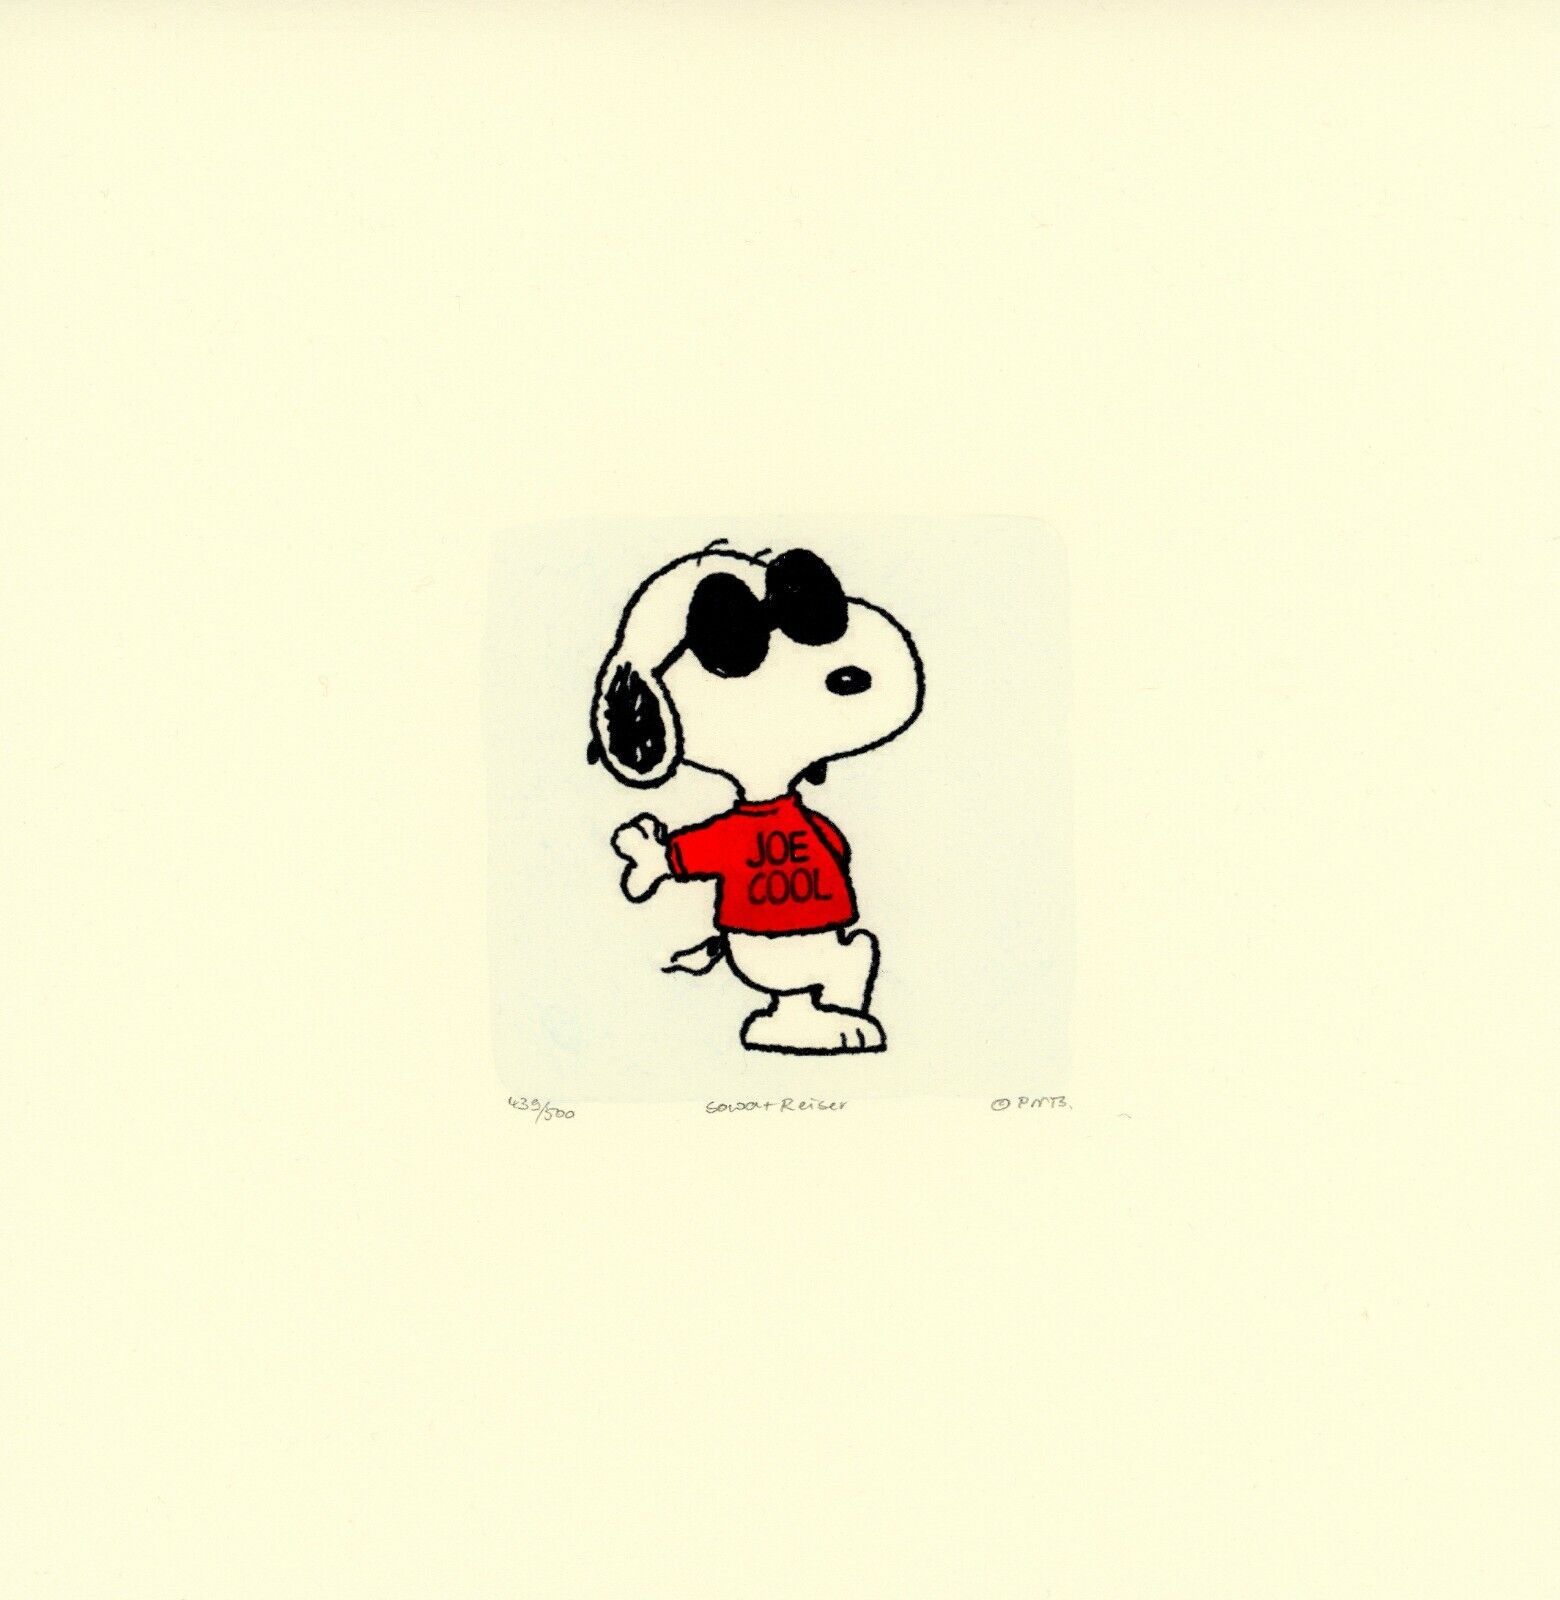 A cartoon of snoopy with headphones on - Charlie Brown